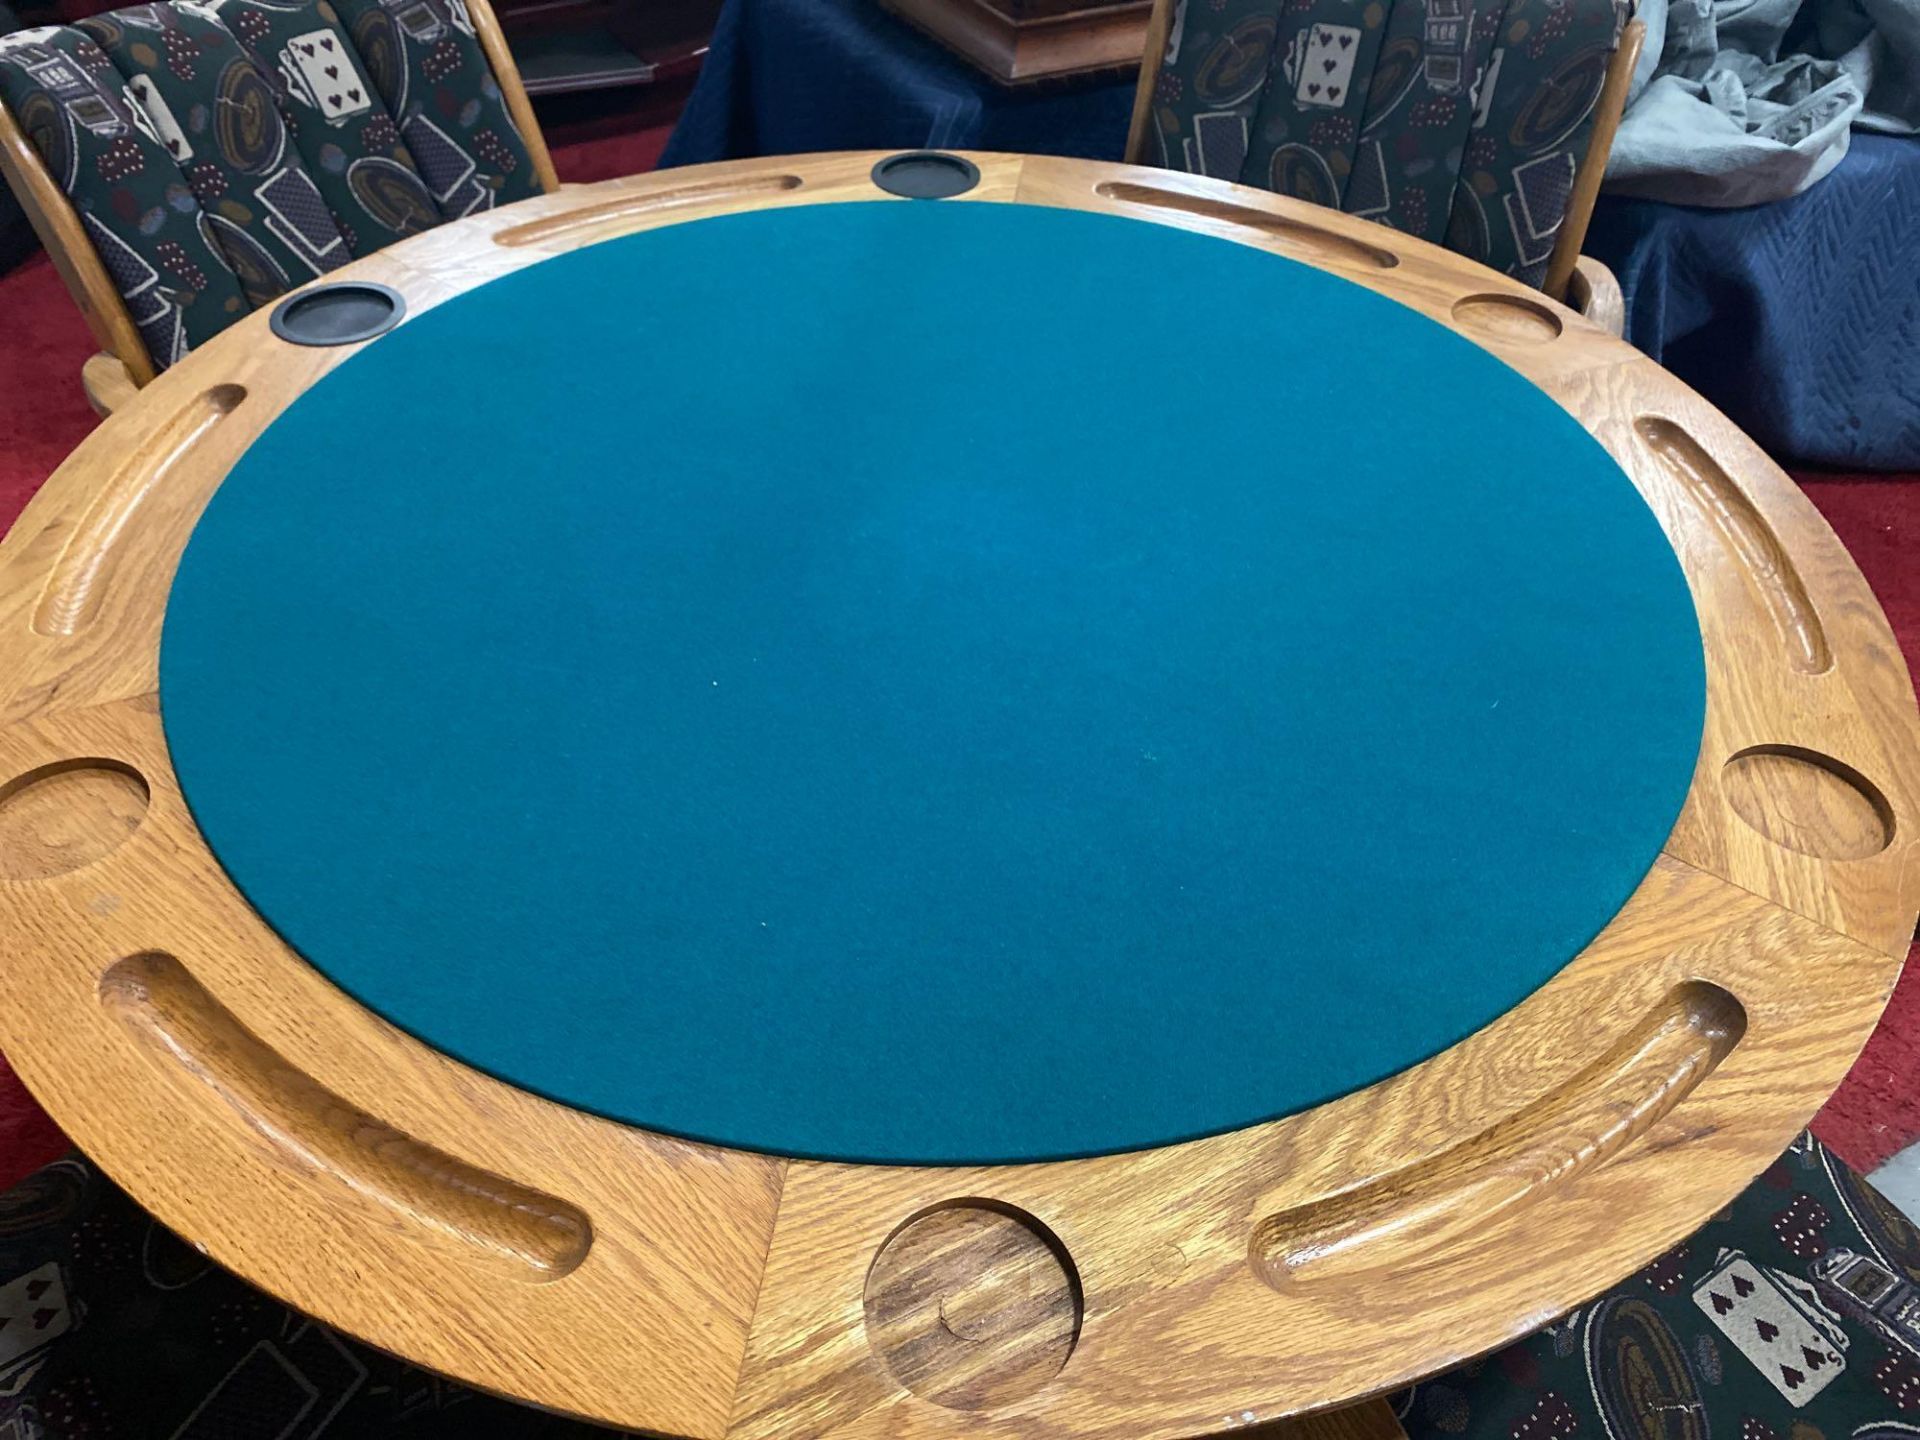 OAK WOOD POKER TABLE WITH REVERSIBLE TABLE TOP, 4 ROLLING CHAIRS ALSO INCLUDED - Image 5 of 8